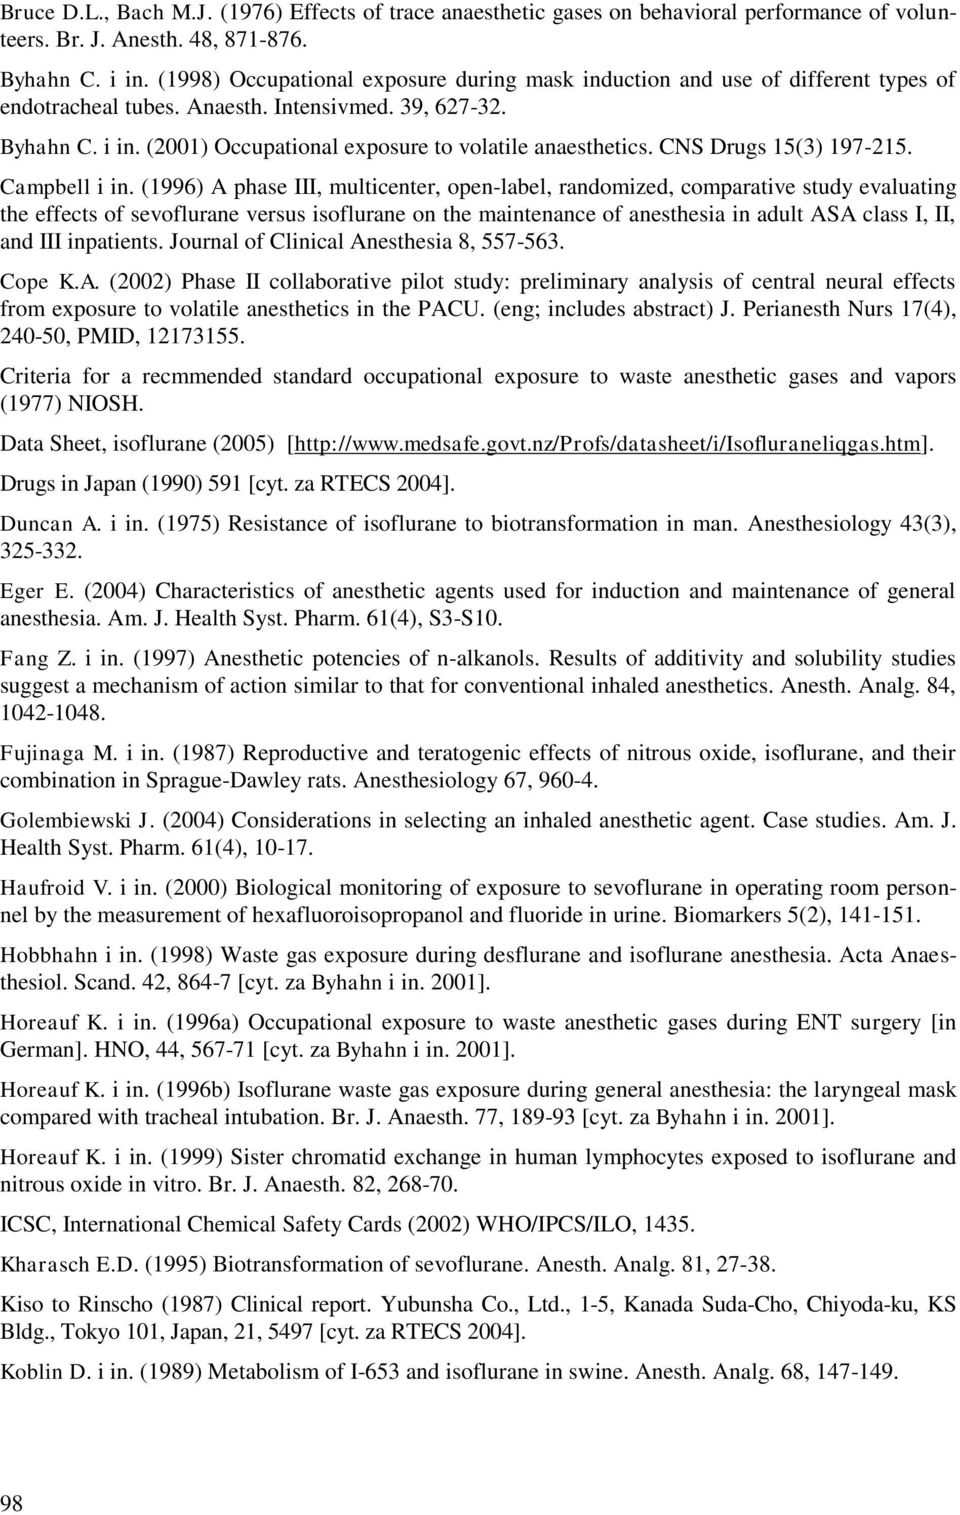 (2001) Occupational exposure to volatile anaesthetics. CNS Drugs 15(3) 197-215. Campbell i in.